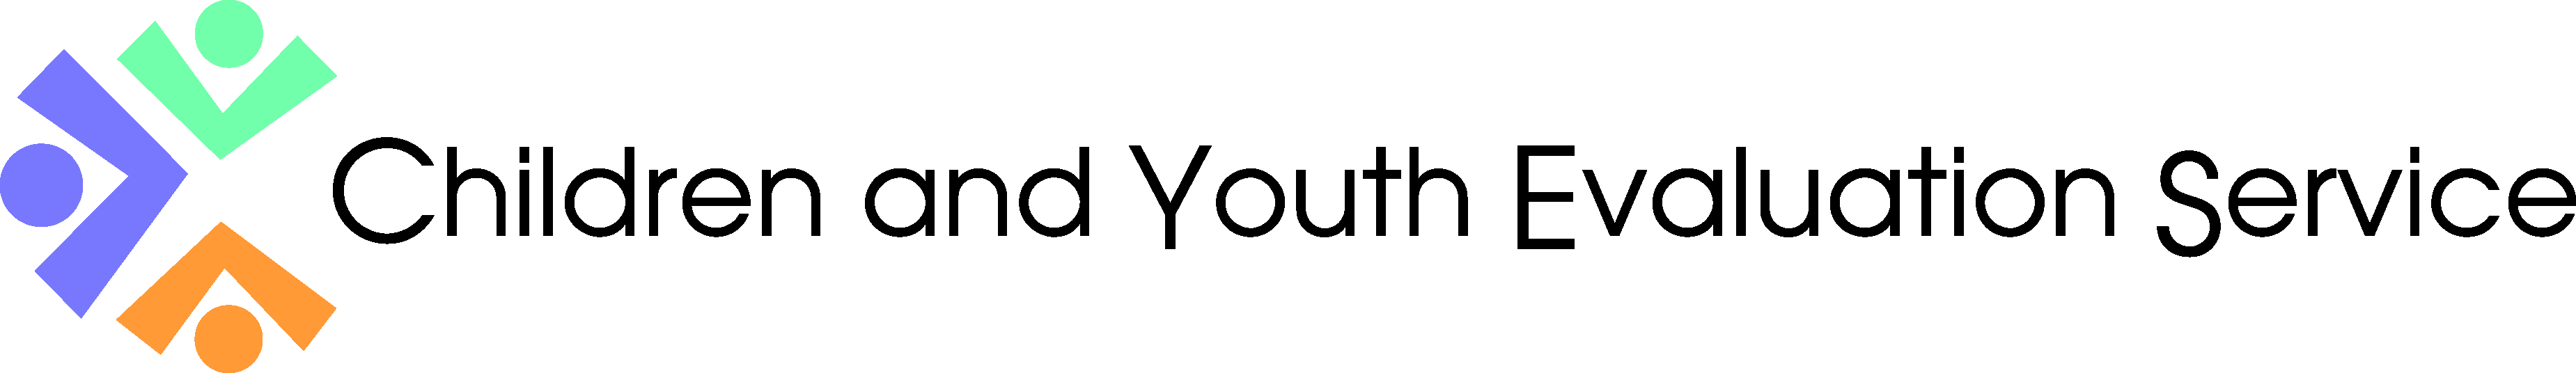 Children and Youth Evaluation Service Logo